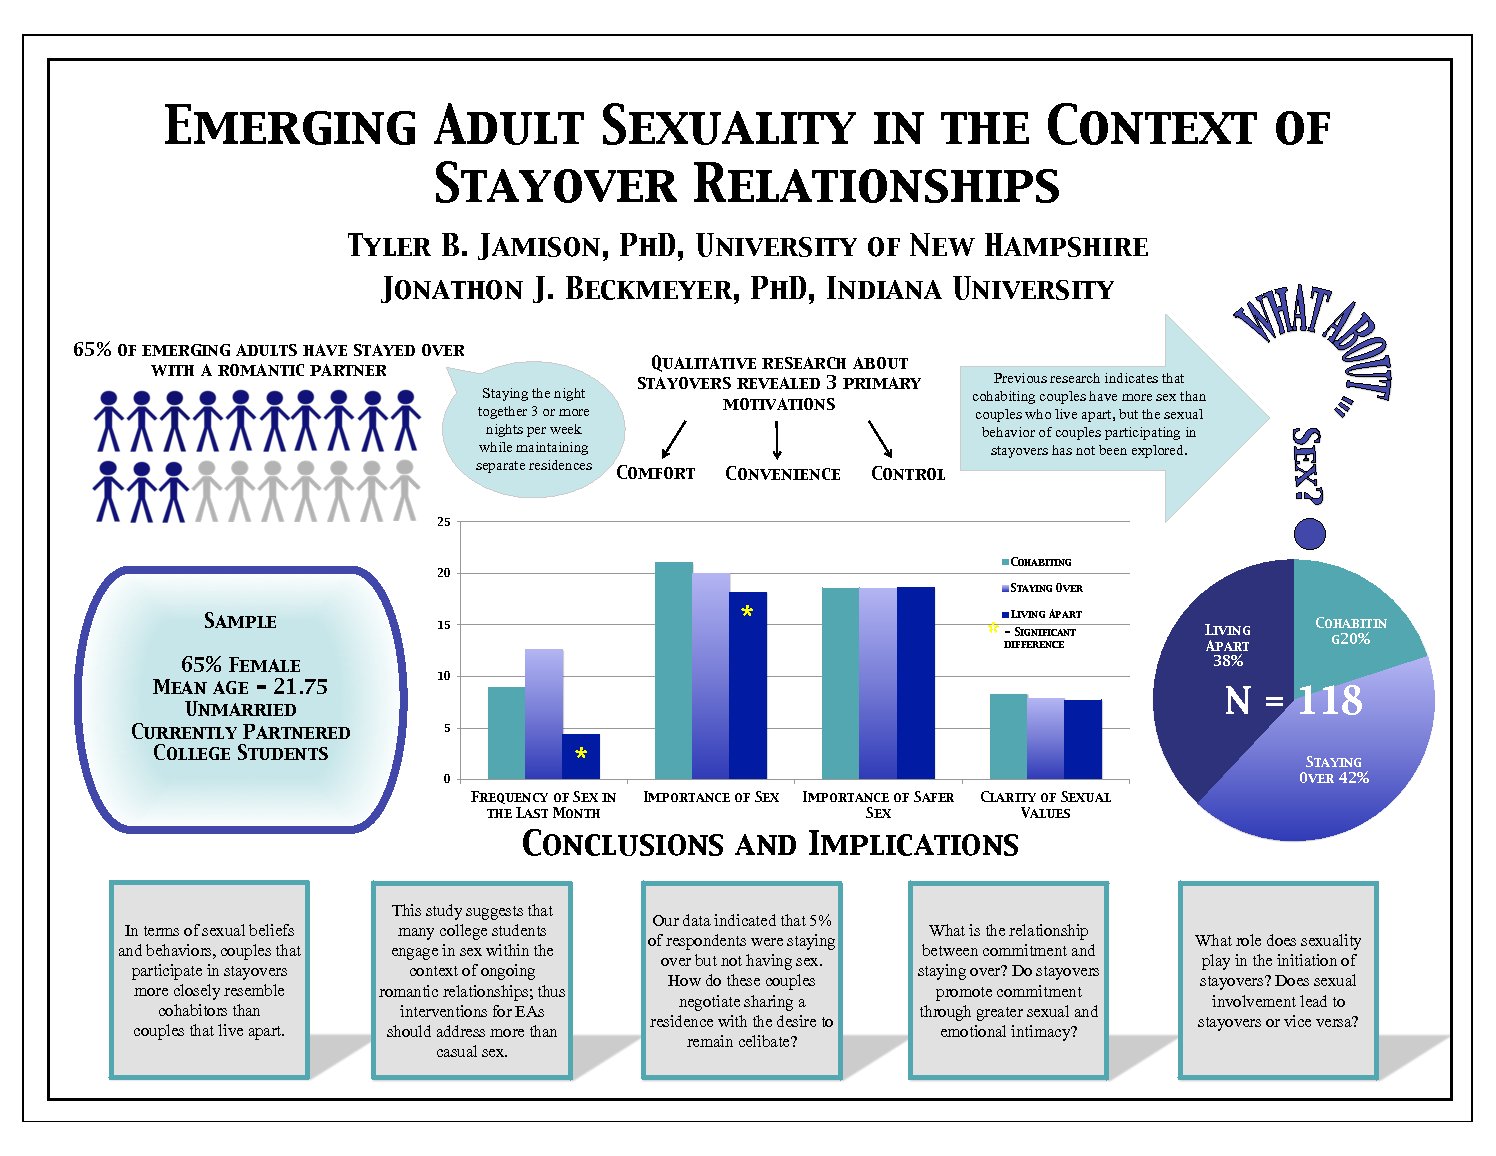 Emerging Adult Sexuality In Stayover Relationships by tbj1000